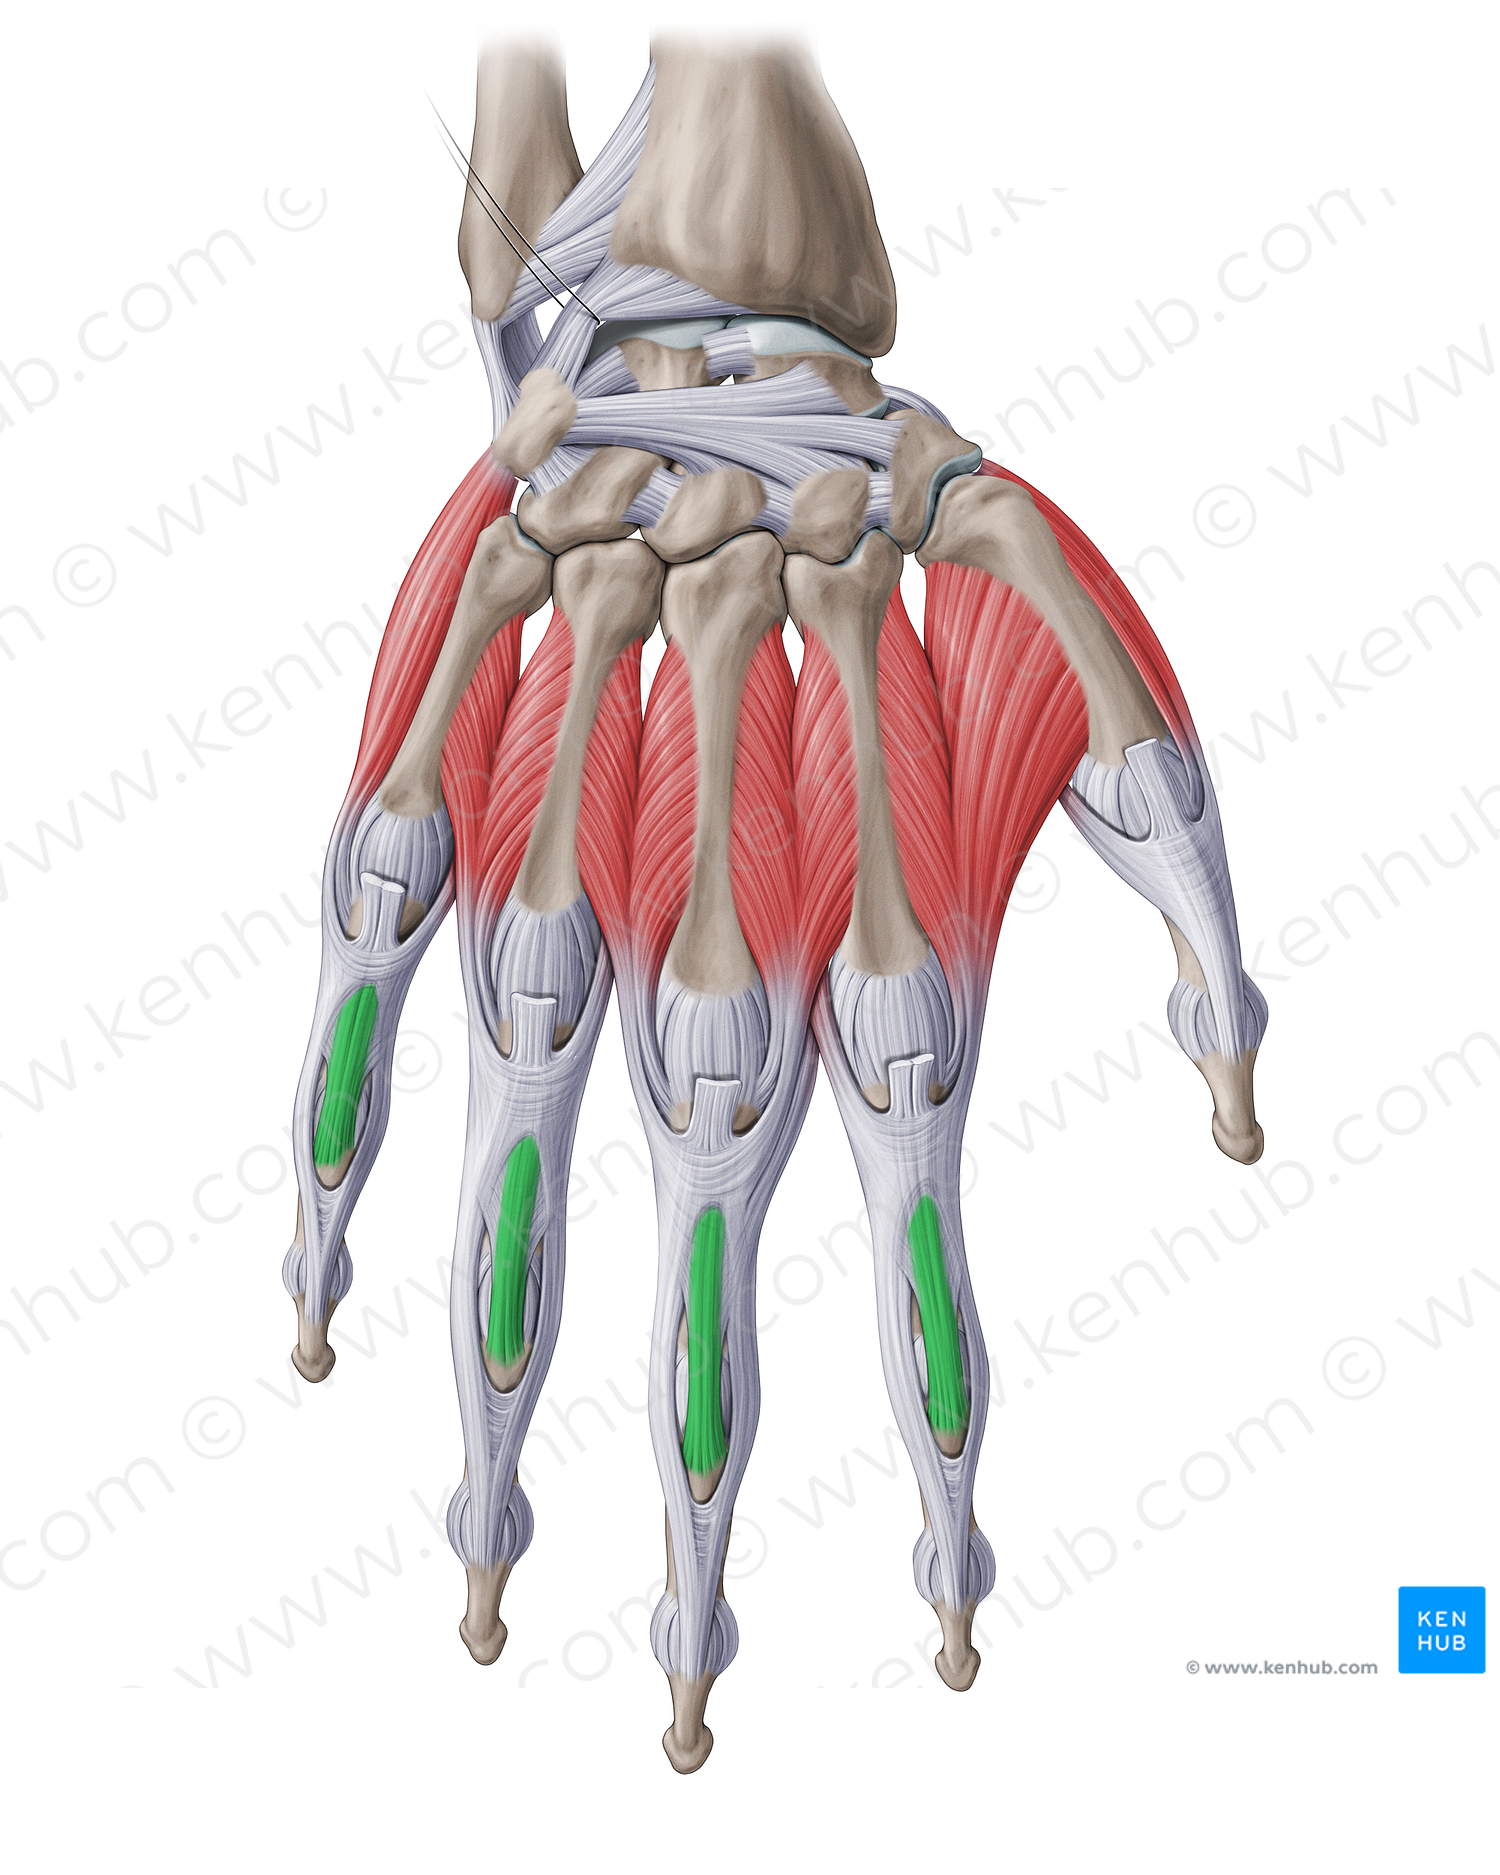 Central band of extensor expansion of hand (#18902)